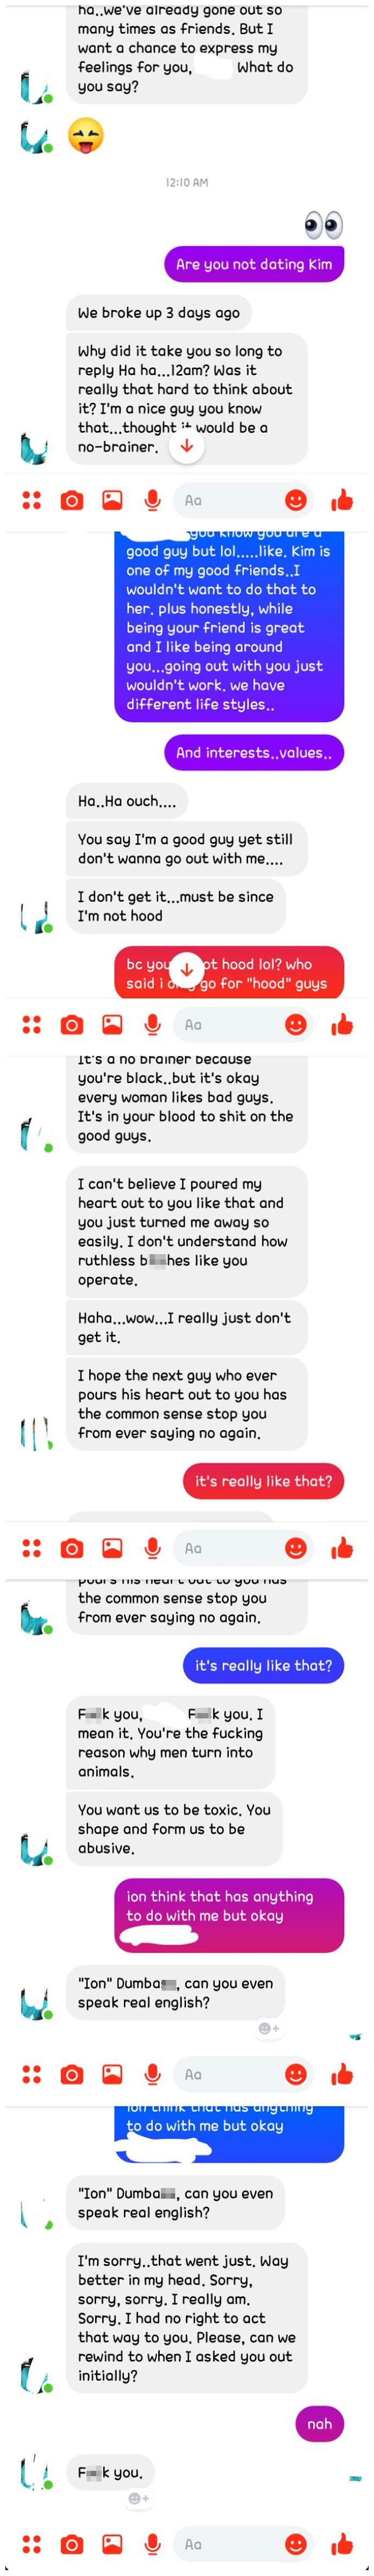 One Of My "Friends" "Confessed" His "Feelings" For Me. I'm All The Sudden The Reason For Toxic Men For Rejecting Him. P.s Sorry For My Font